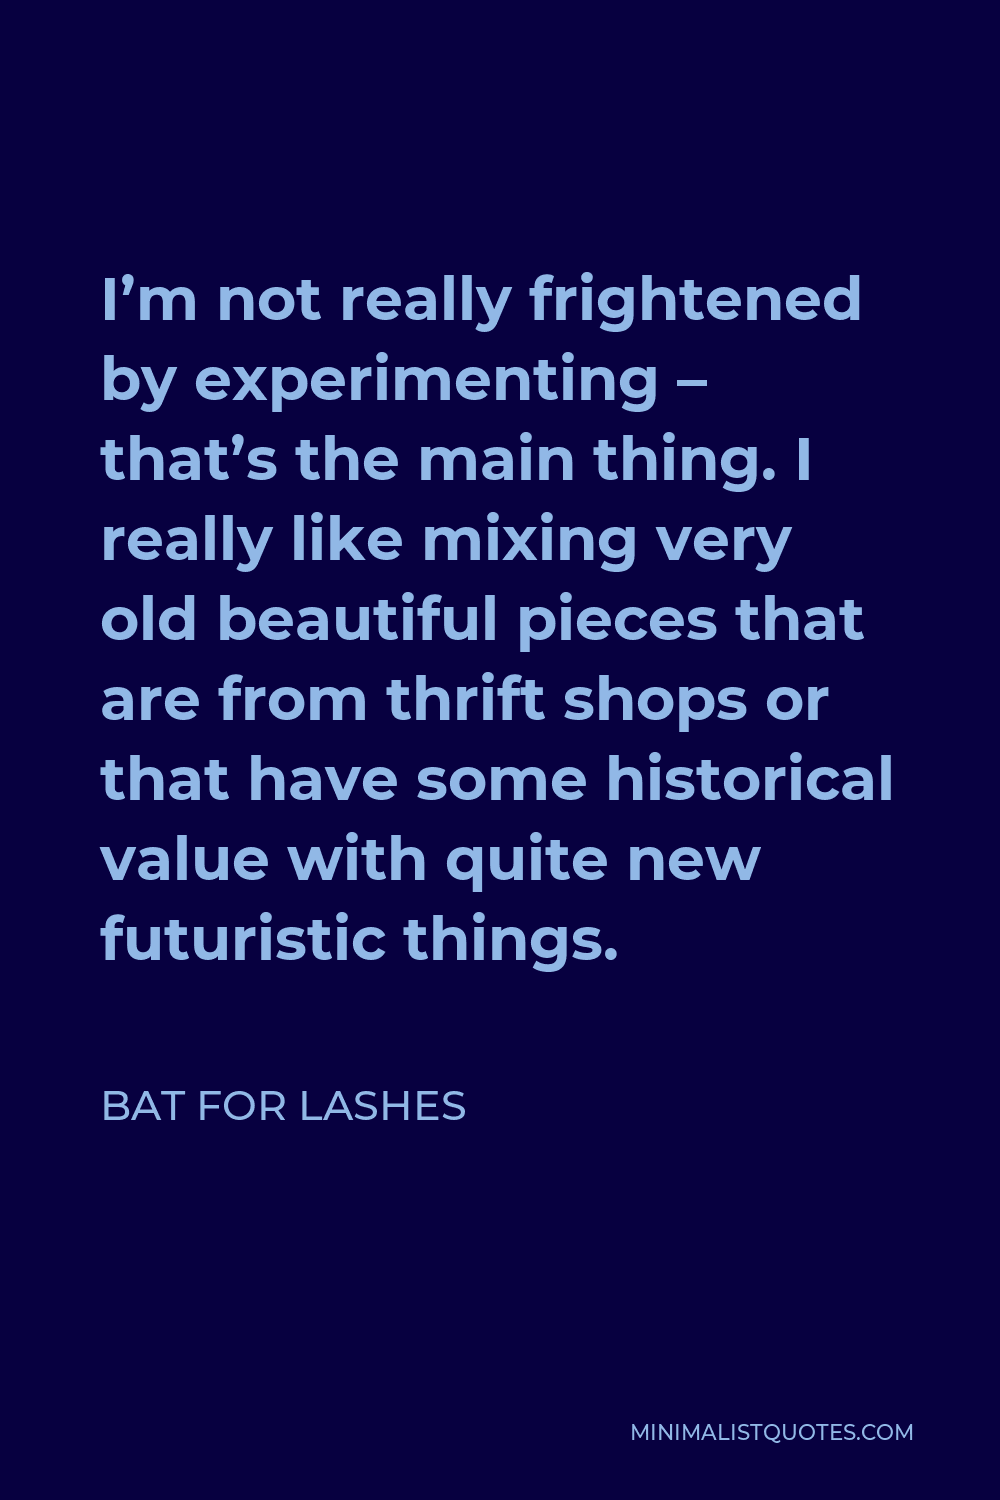 Bat for Lashes Quote - I’m not really frightened by experimenting – that’s the main thing. I really like mixing very old beautiful pieces that are from thrift shops or that have some historical value with quite new futuristic things.